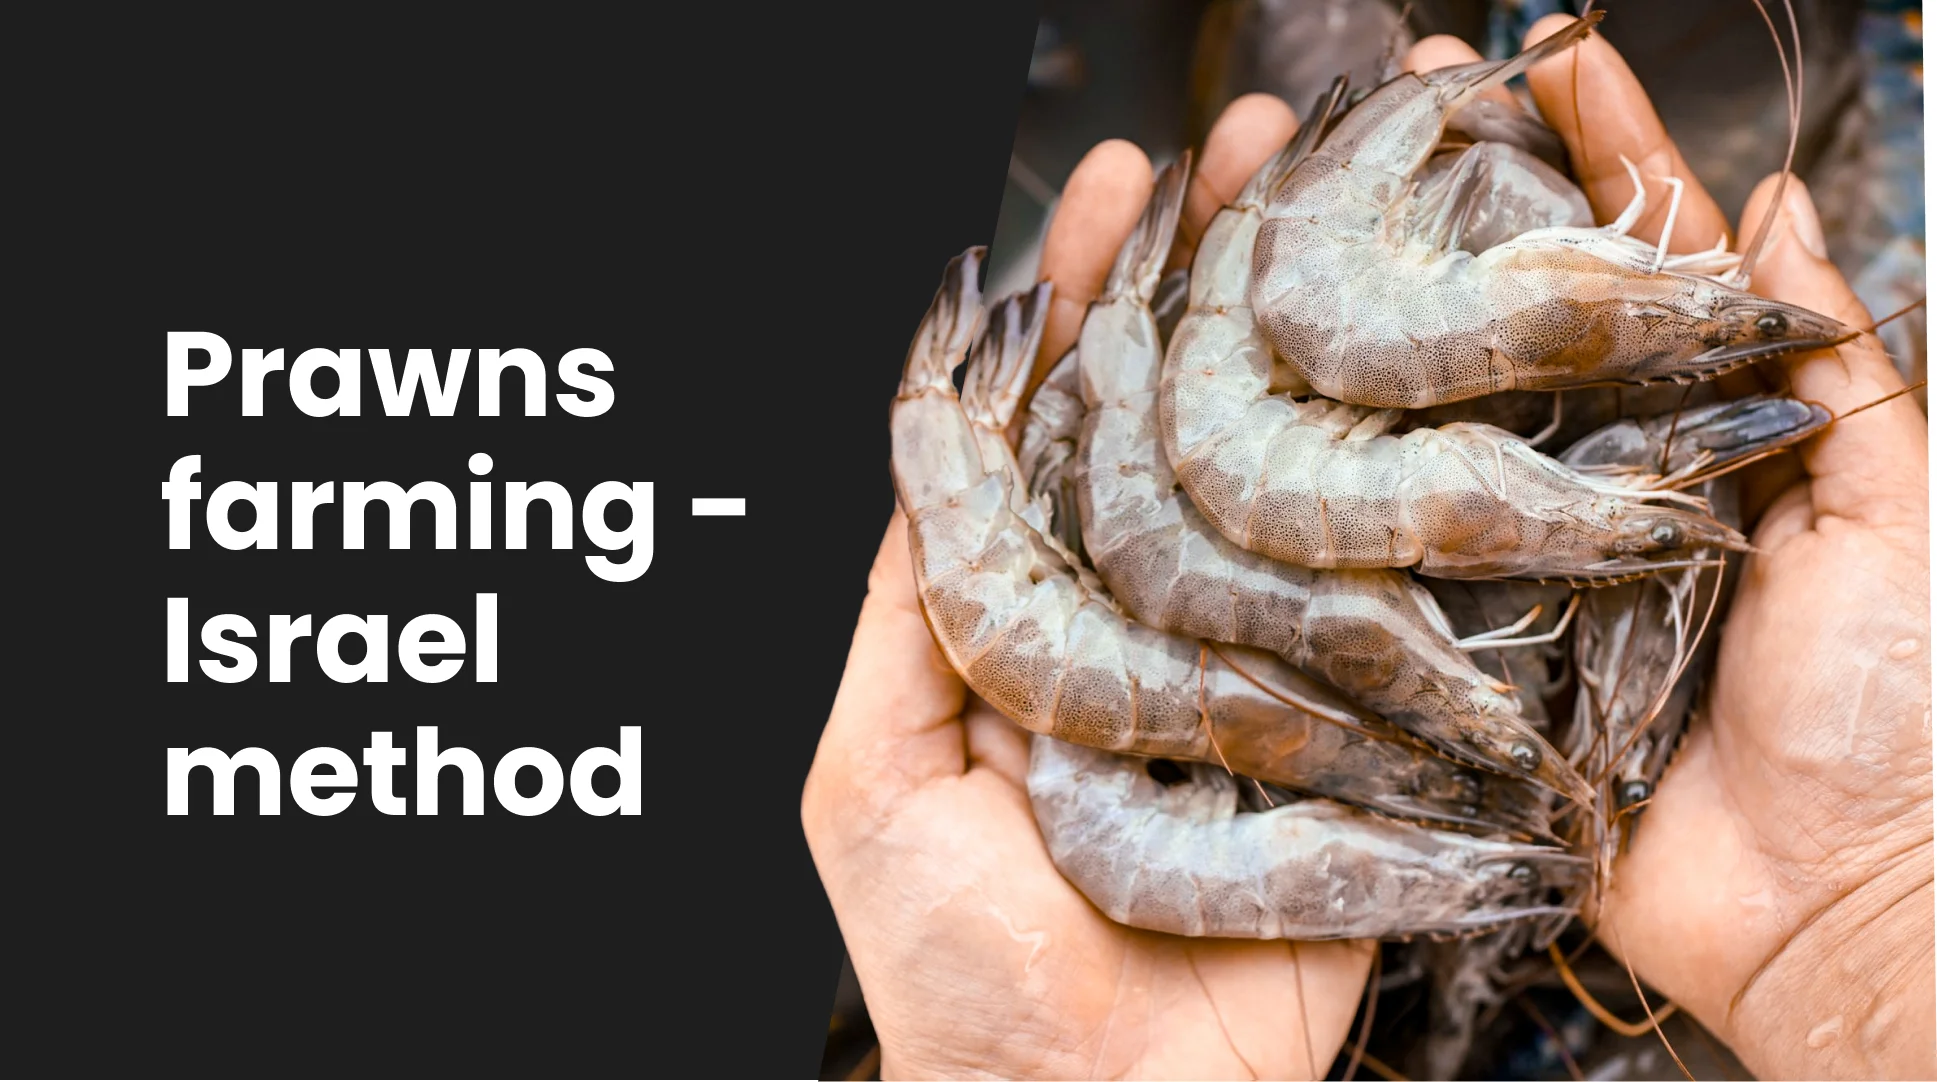 Course Trailer: Prawns Farming Course - Earn 10 lakh/year. Watch to know more.